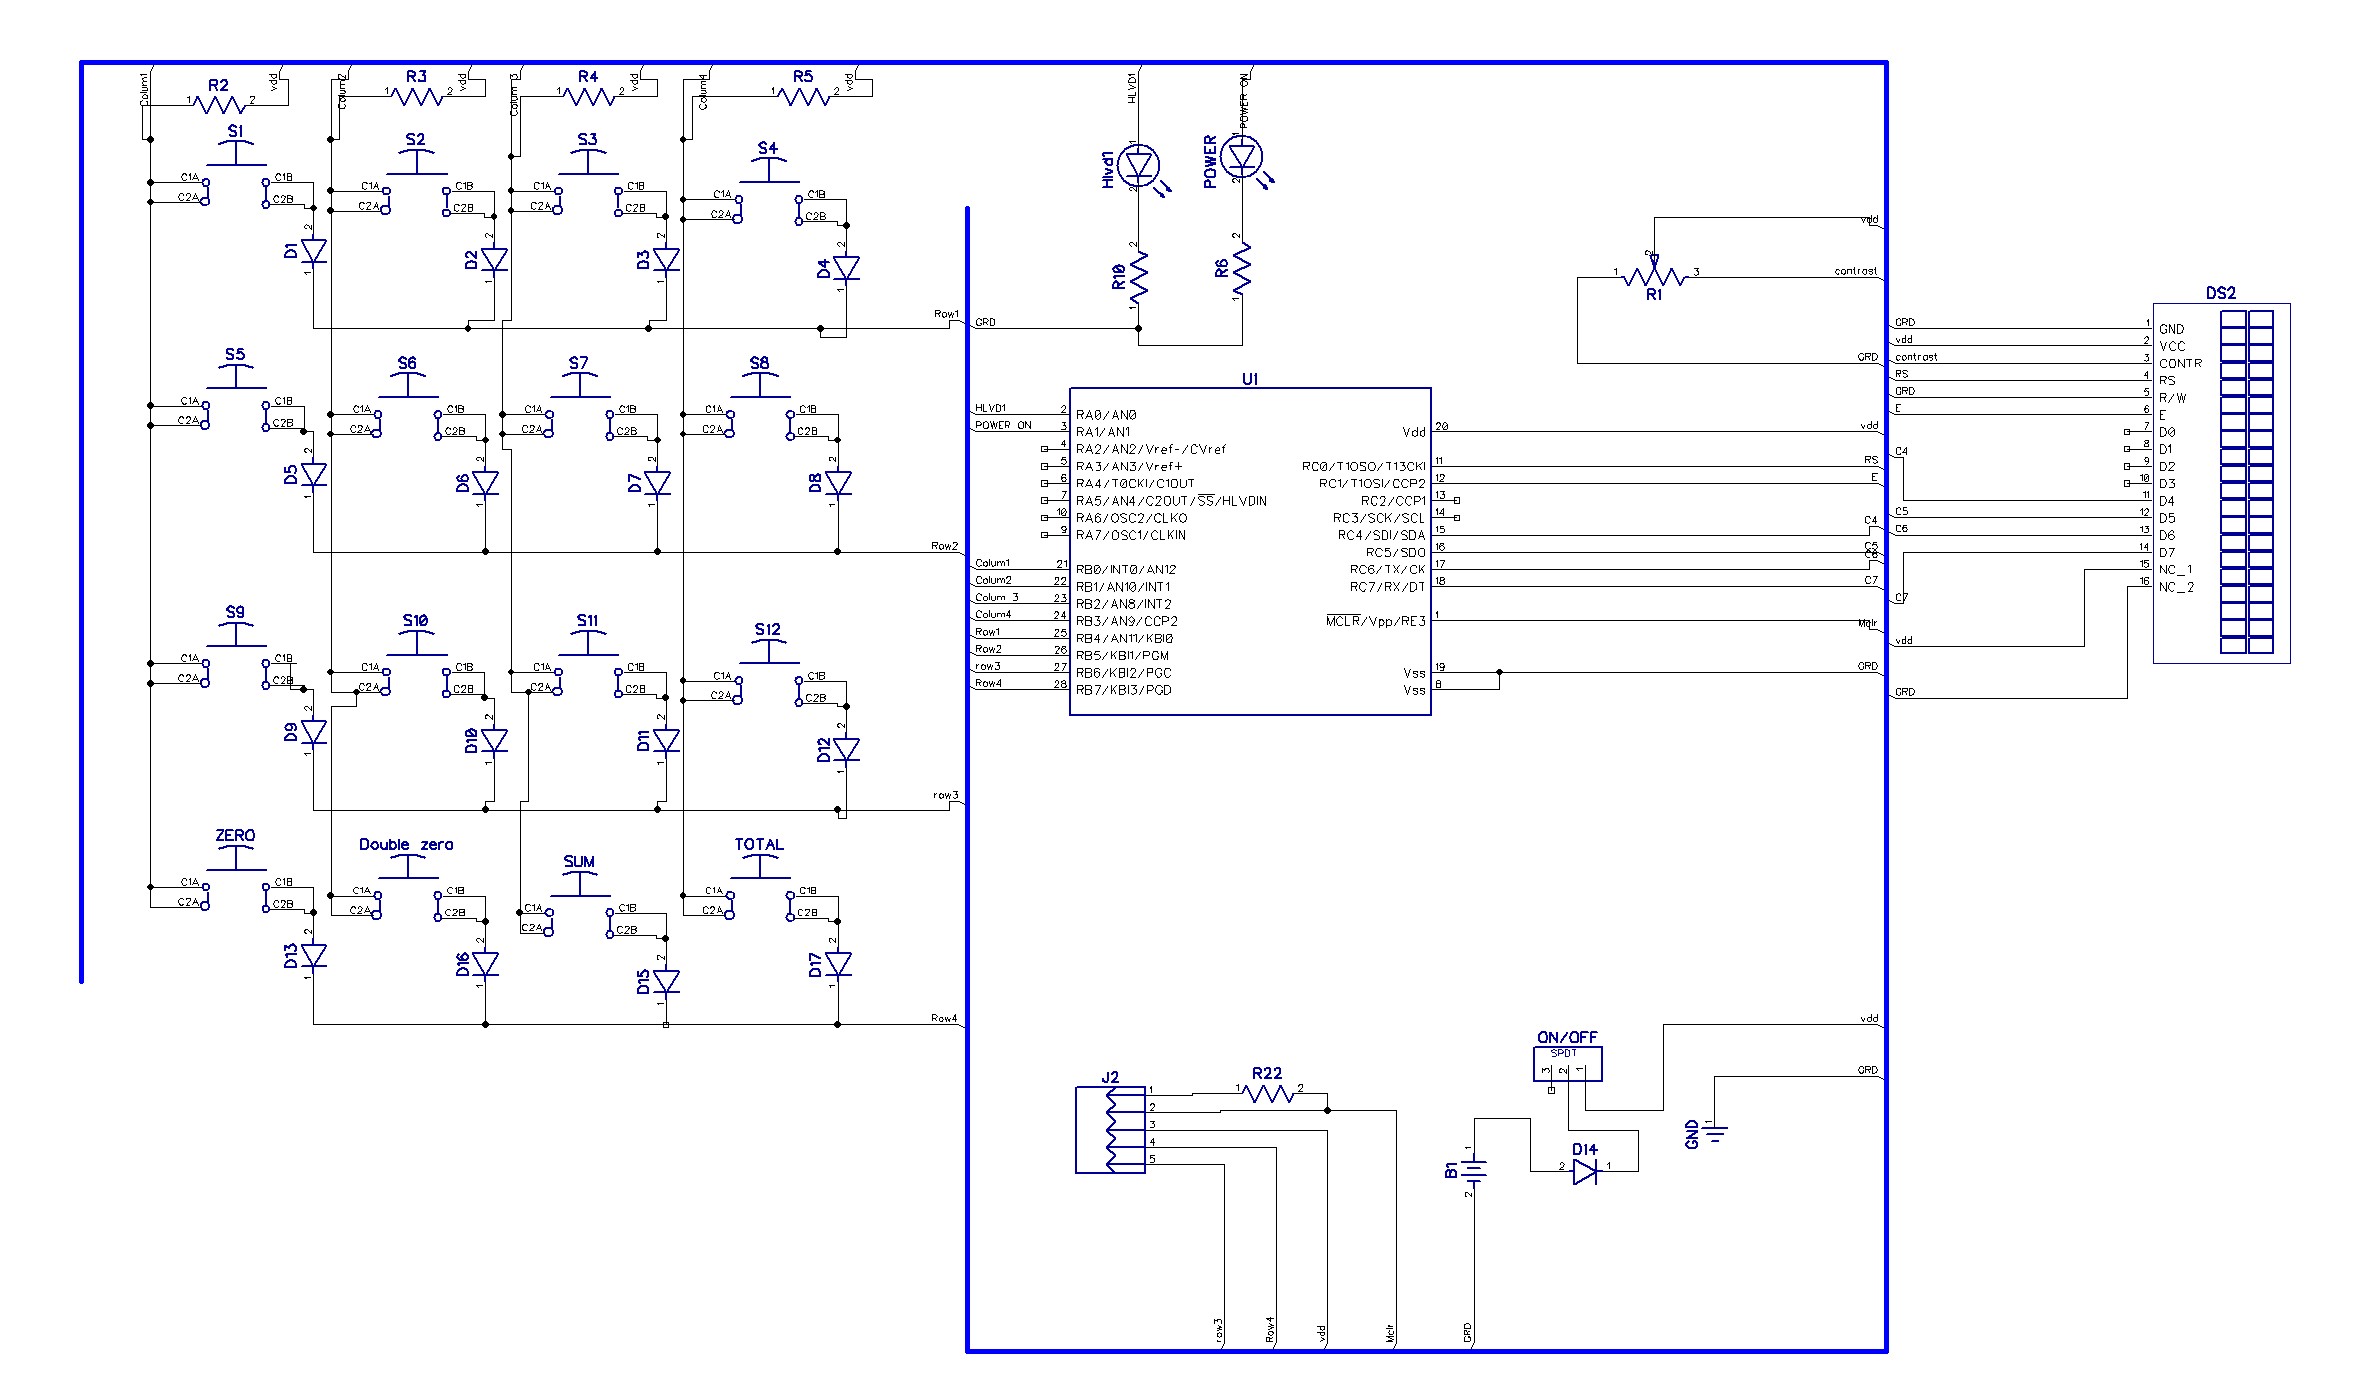 pic of schematic.jpg